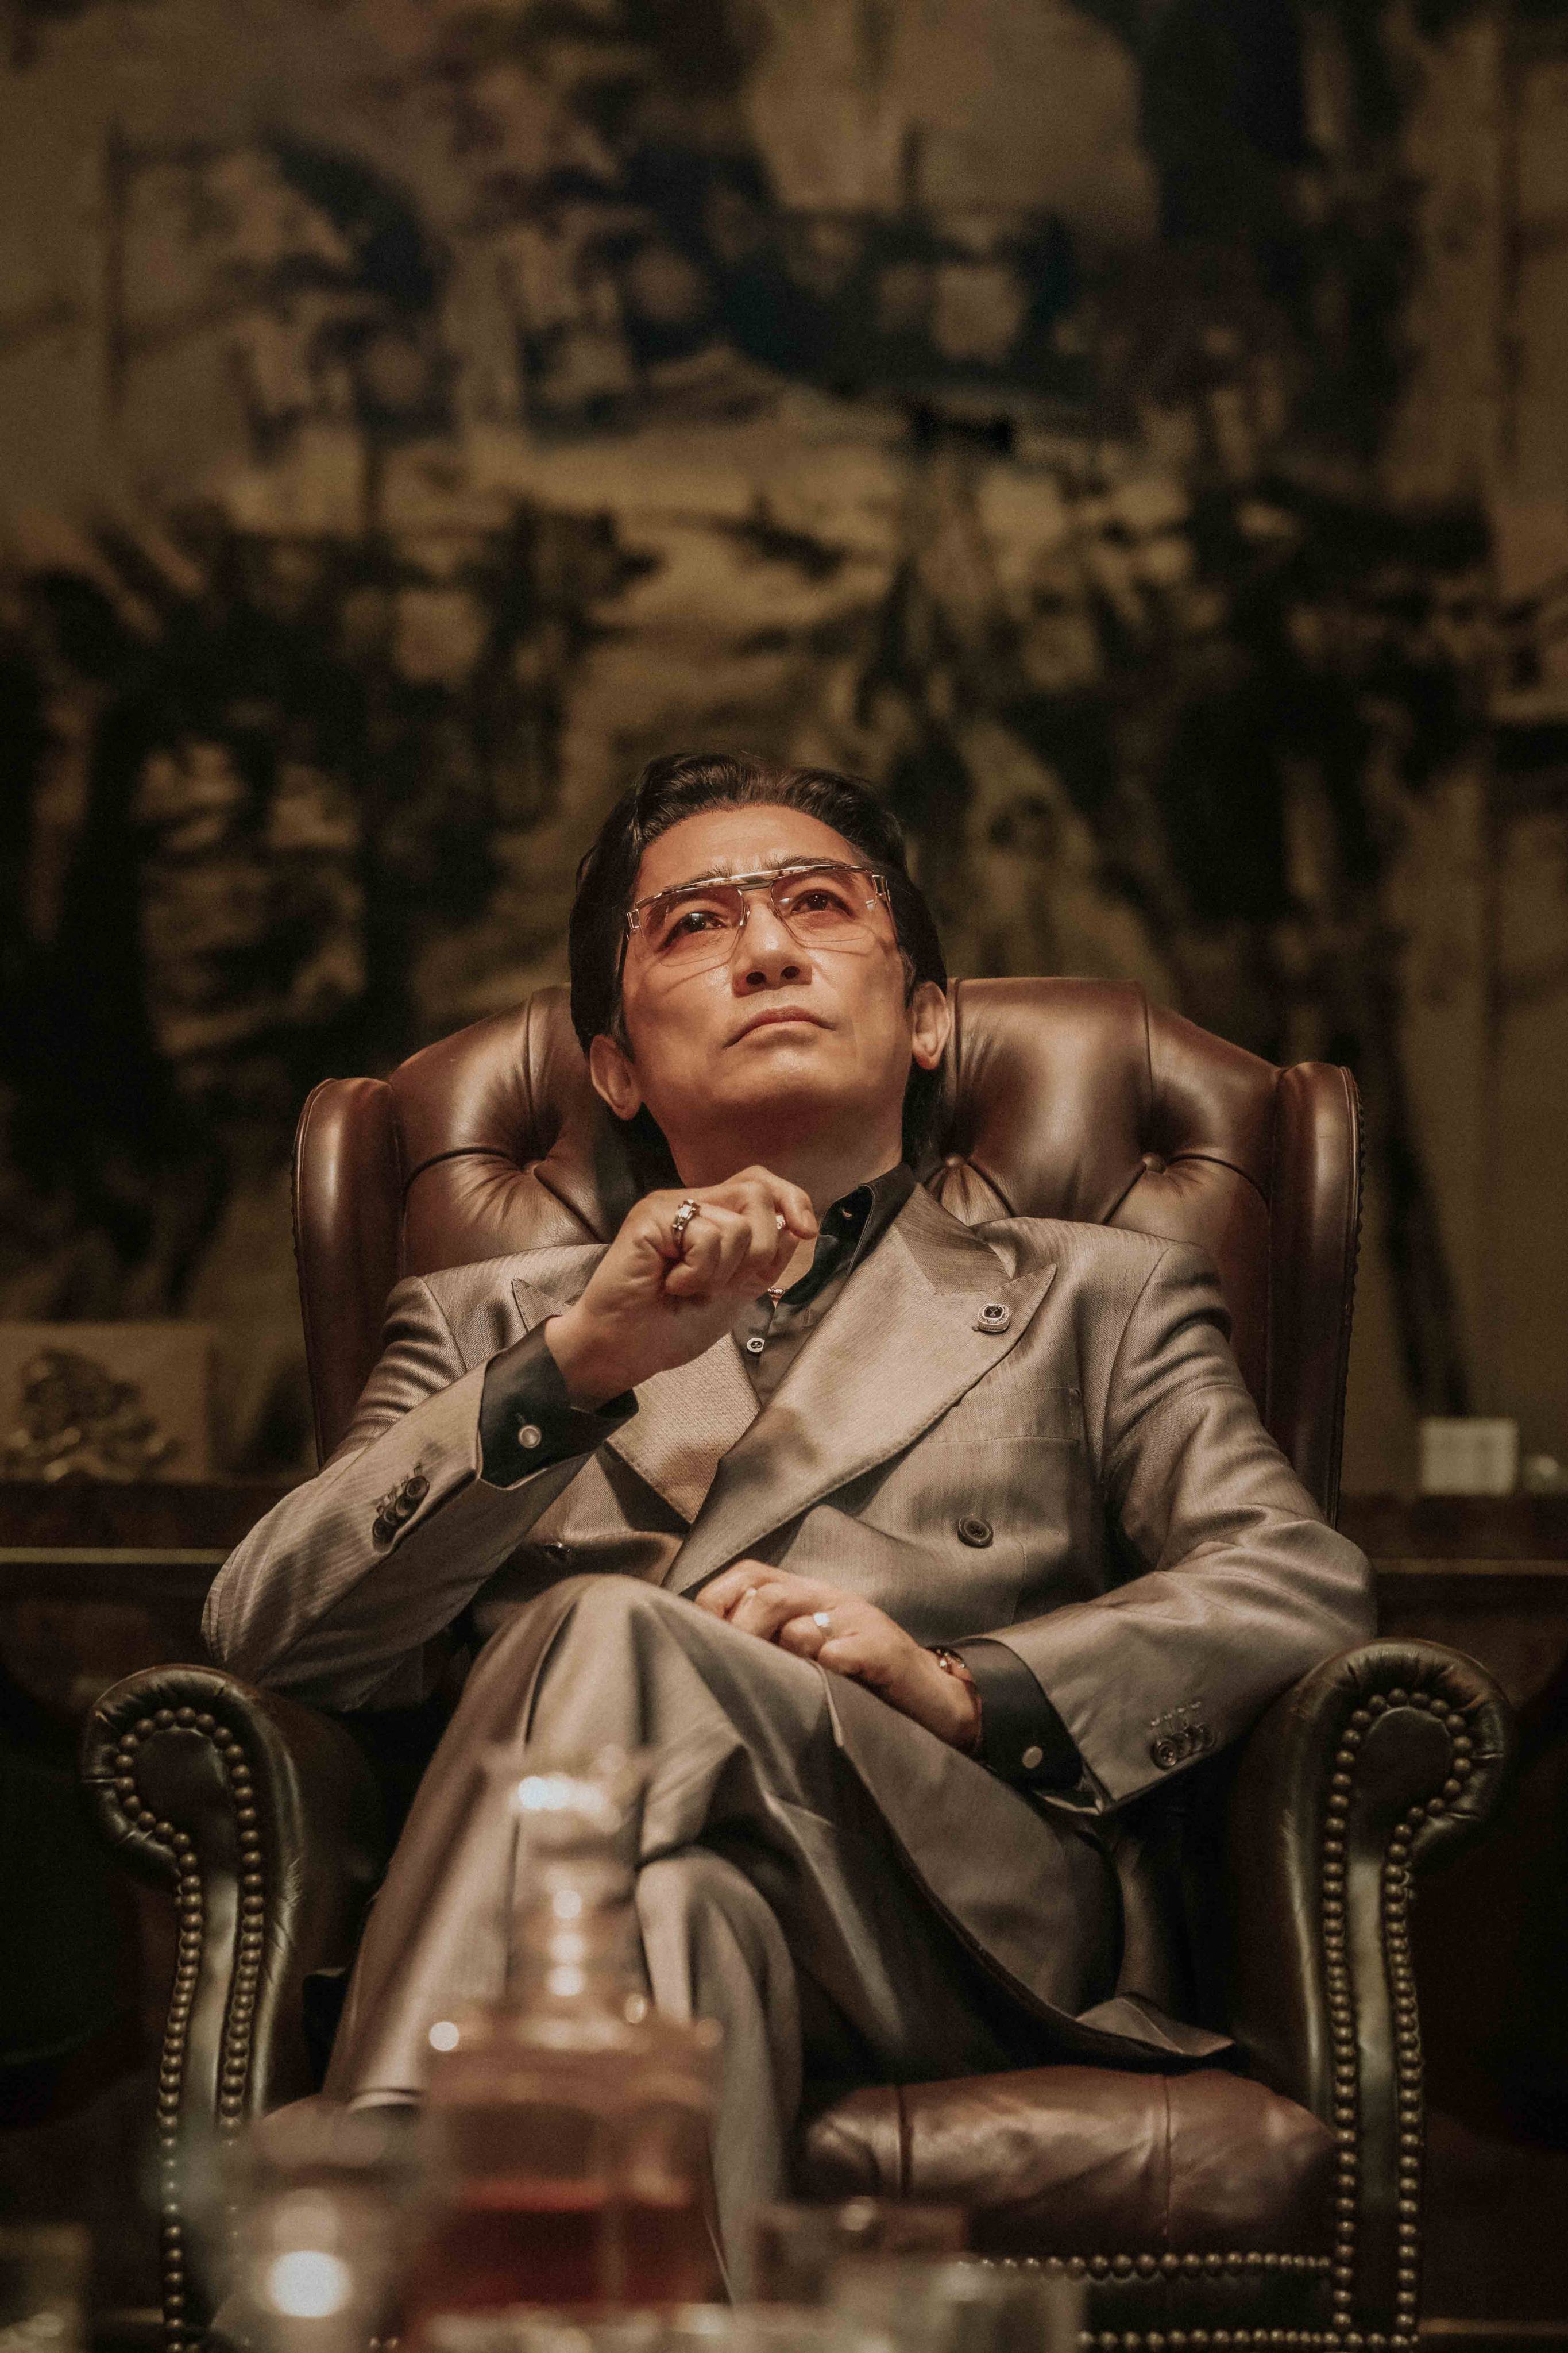 Tony Leung in a still from “The Goldfinger”.